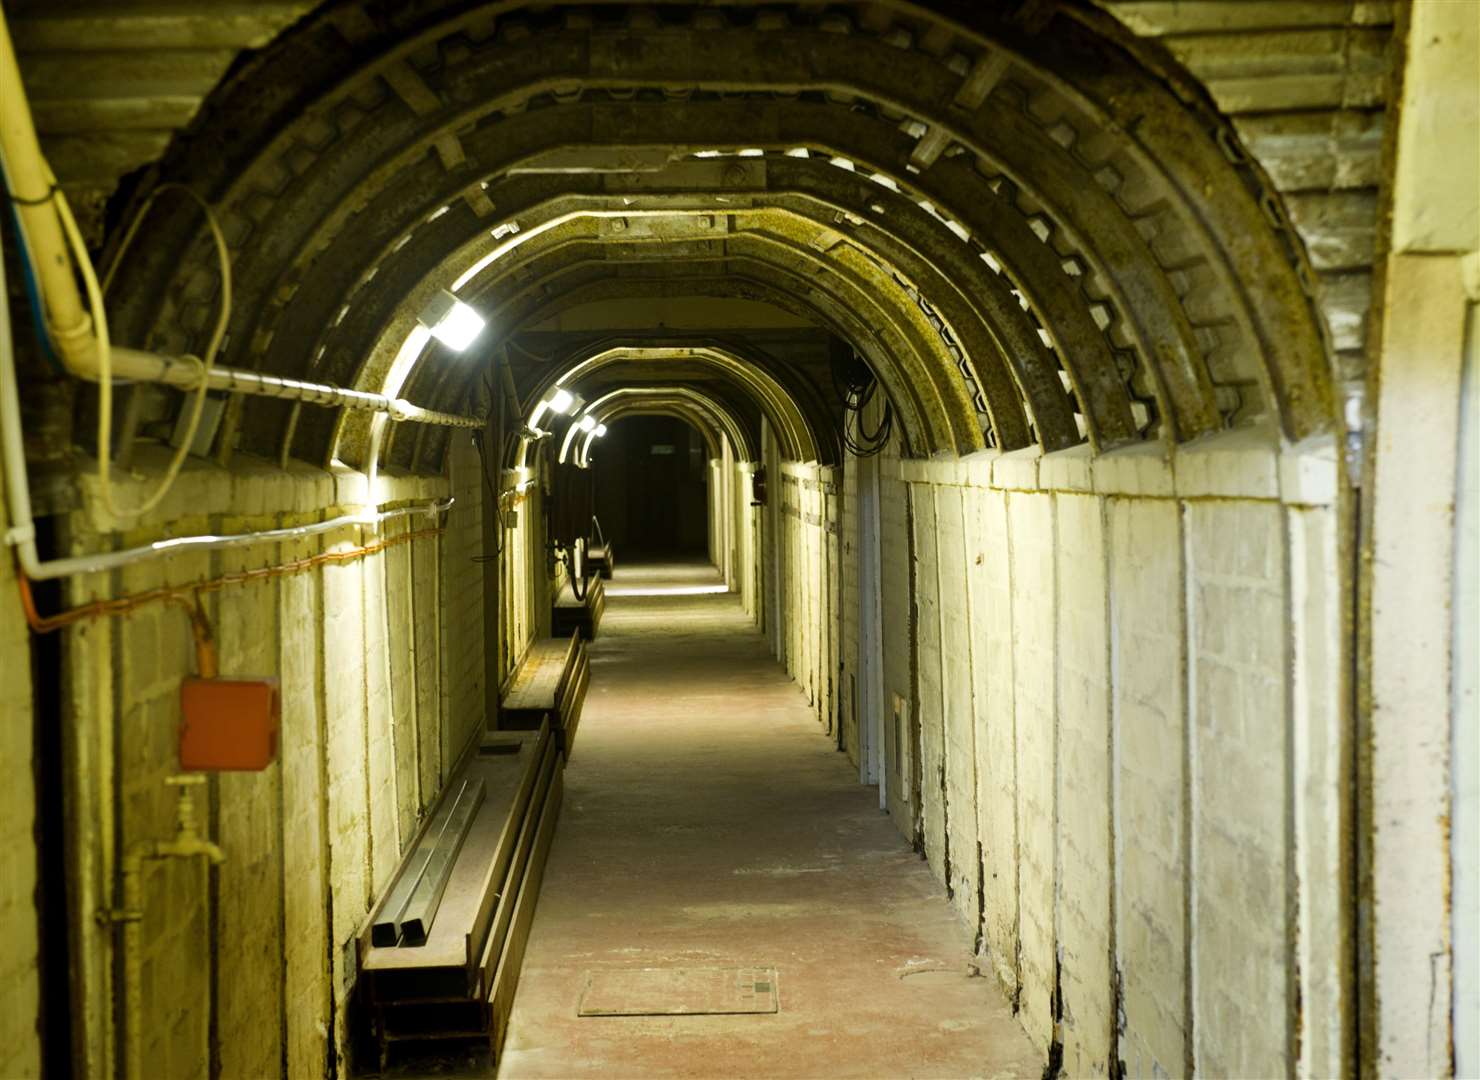 One of the Dumpy tunnels in Dover